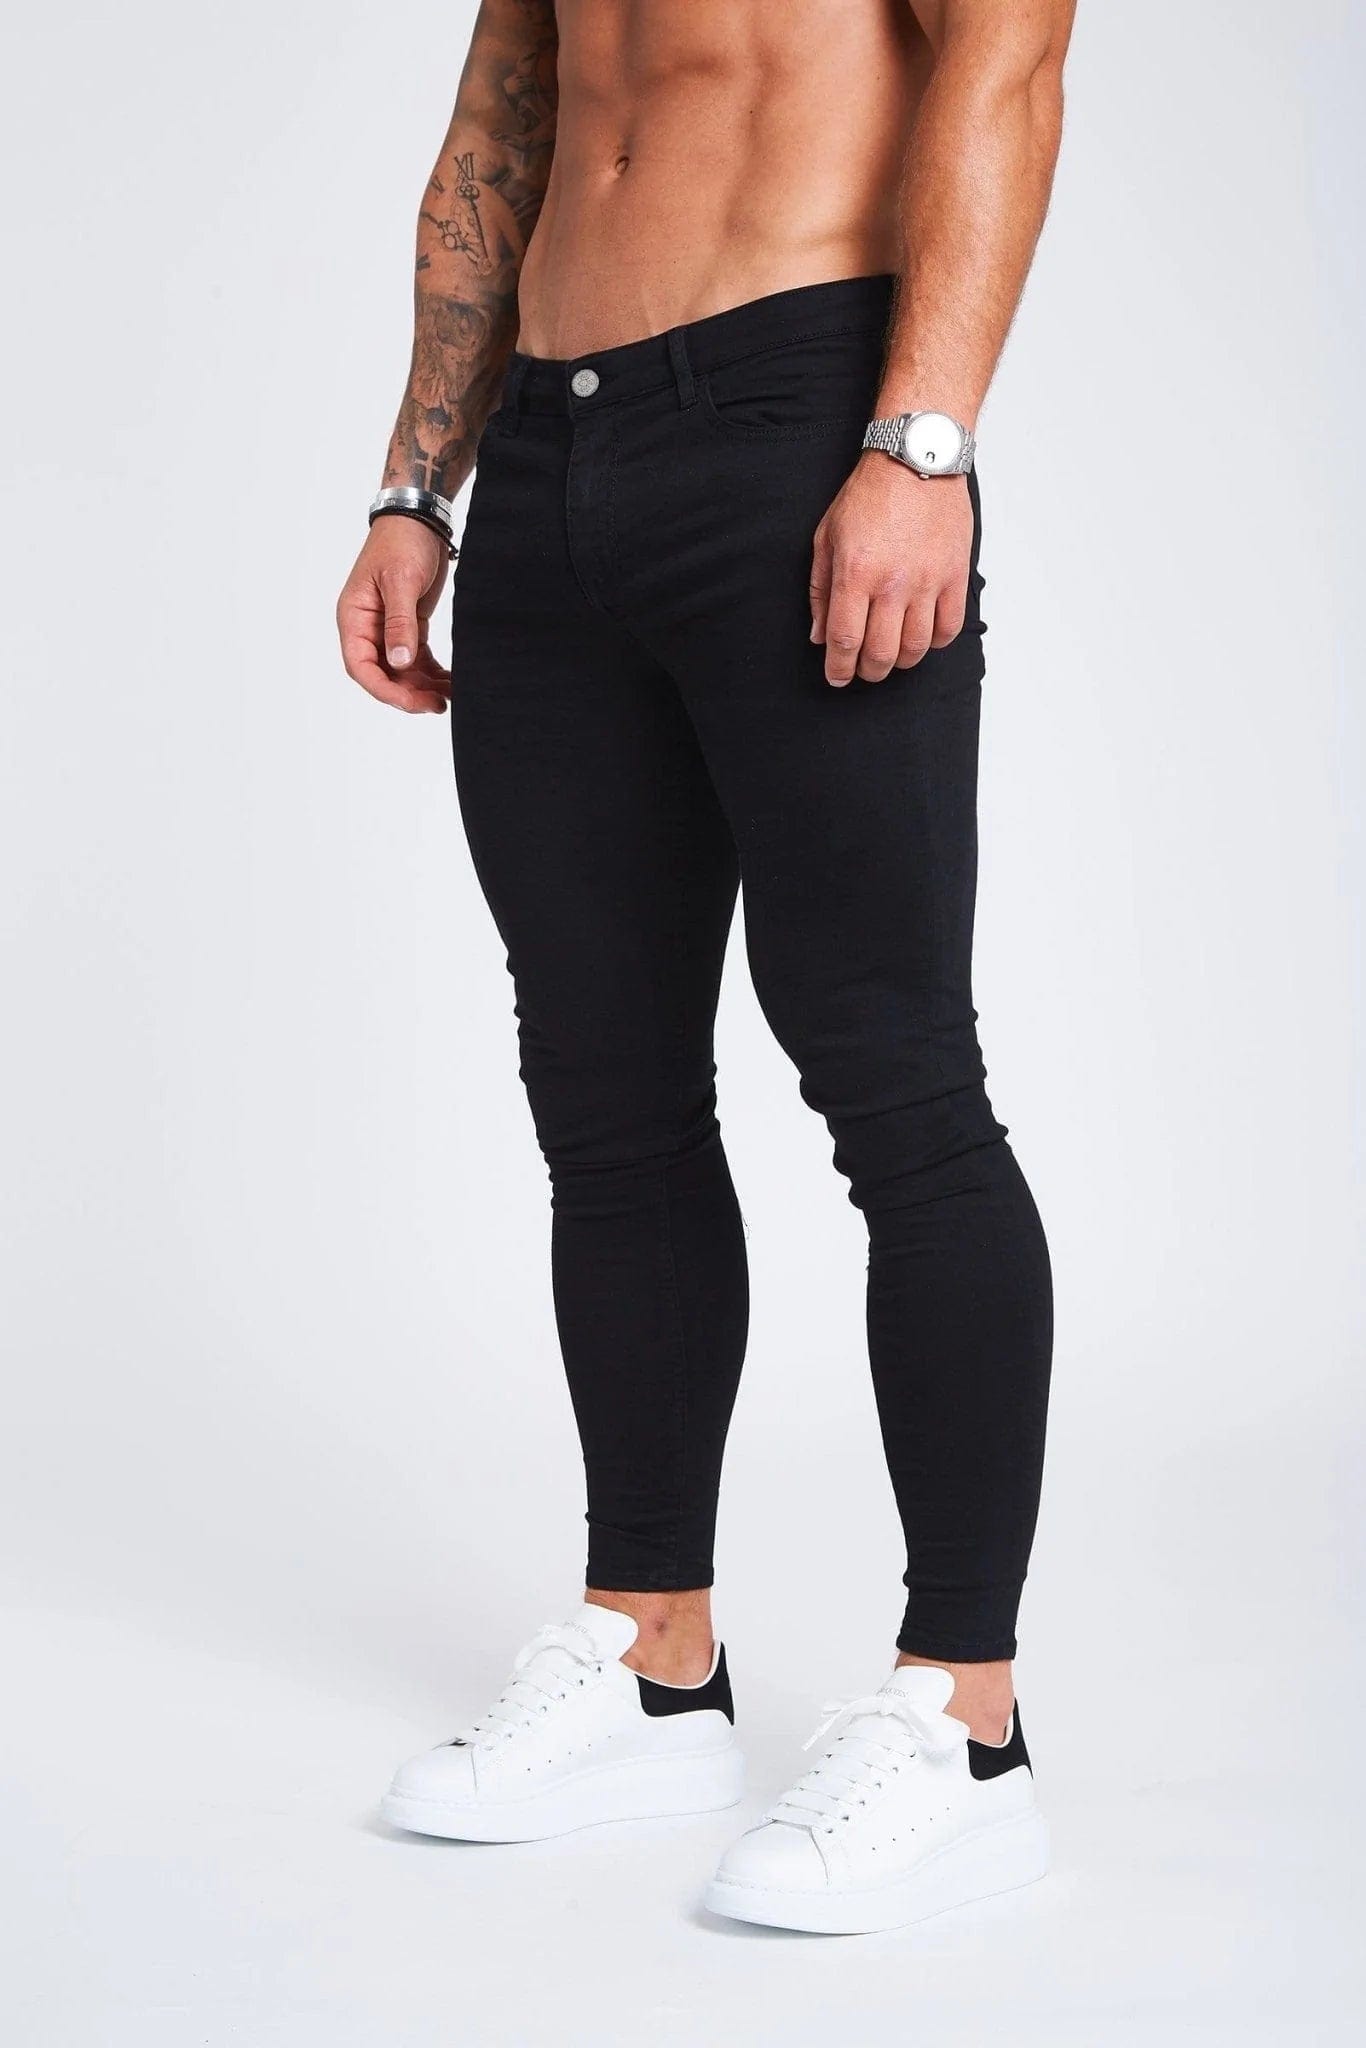 BLACK JEANS - NON RIPPED